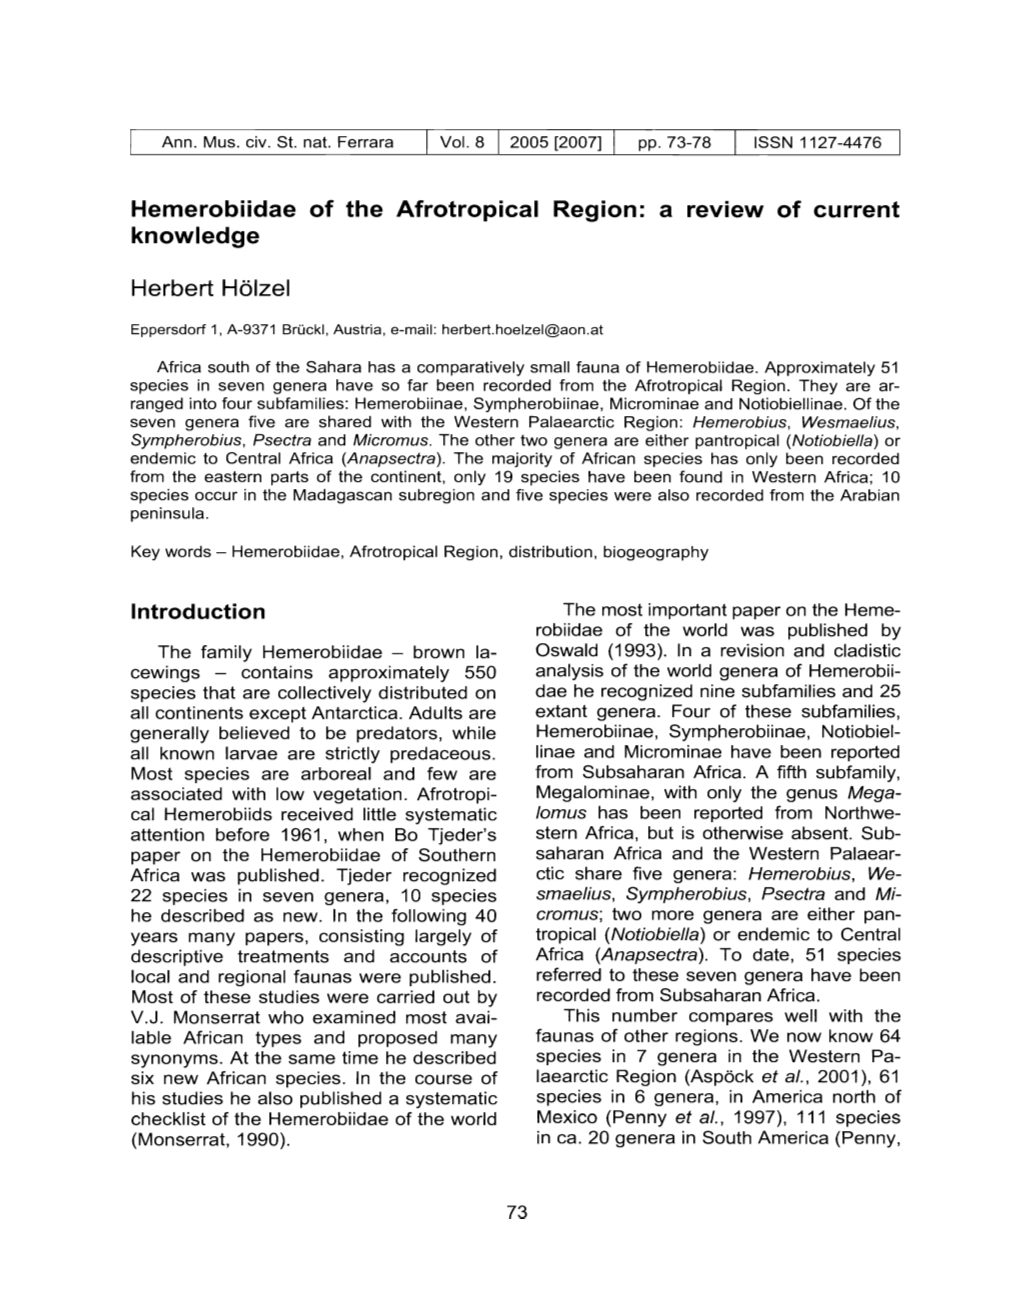 Hemerobiidae of the Afrotropical Region: a Review of Current Knowledge